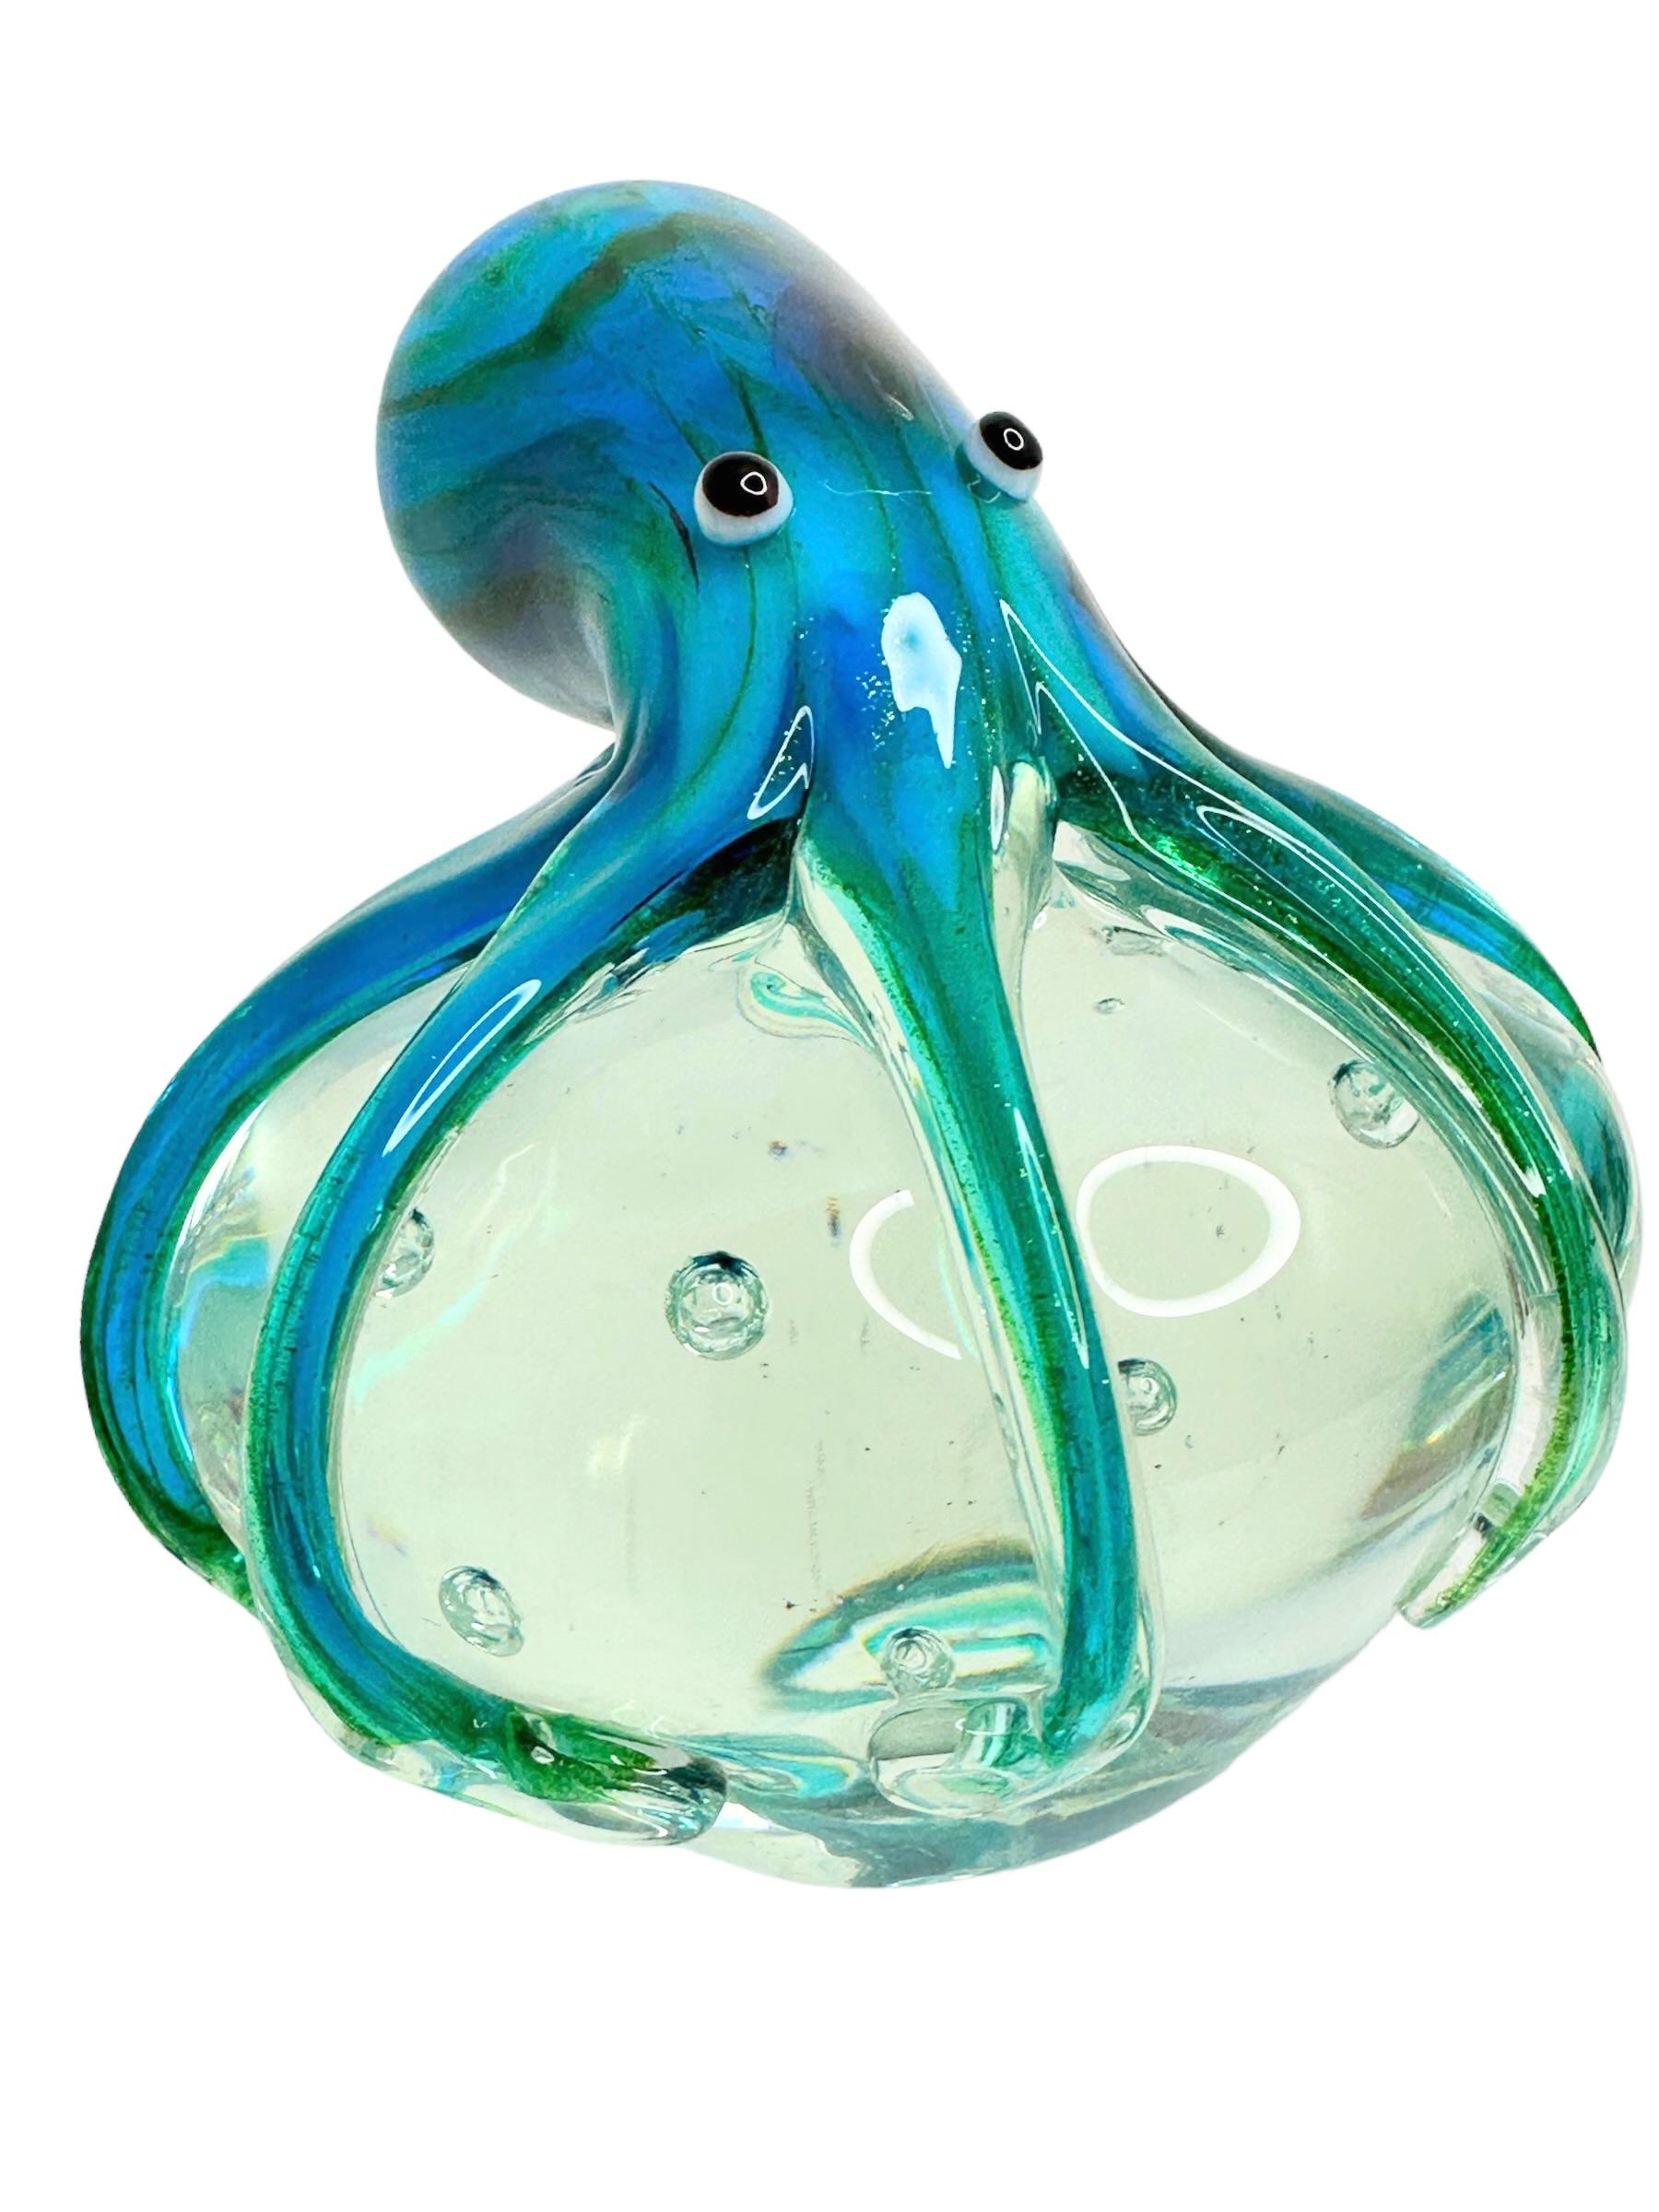 Murano Glass Gorgeous Murano Italian Art Glass Giant Octopus Paperweight, Italy, 1980s For Sale